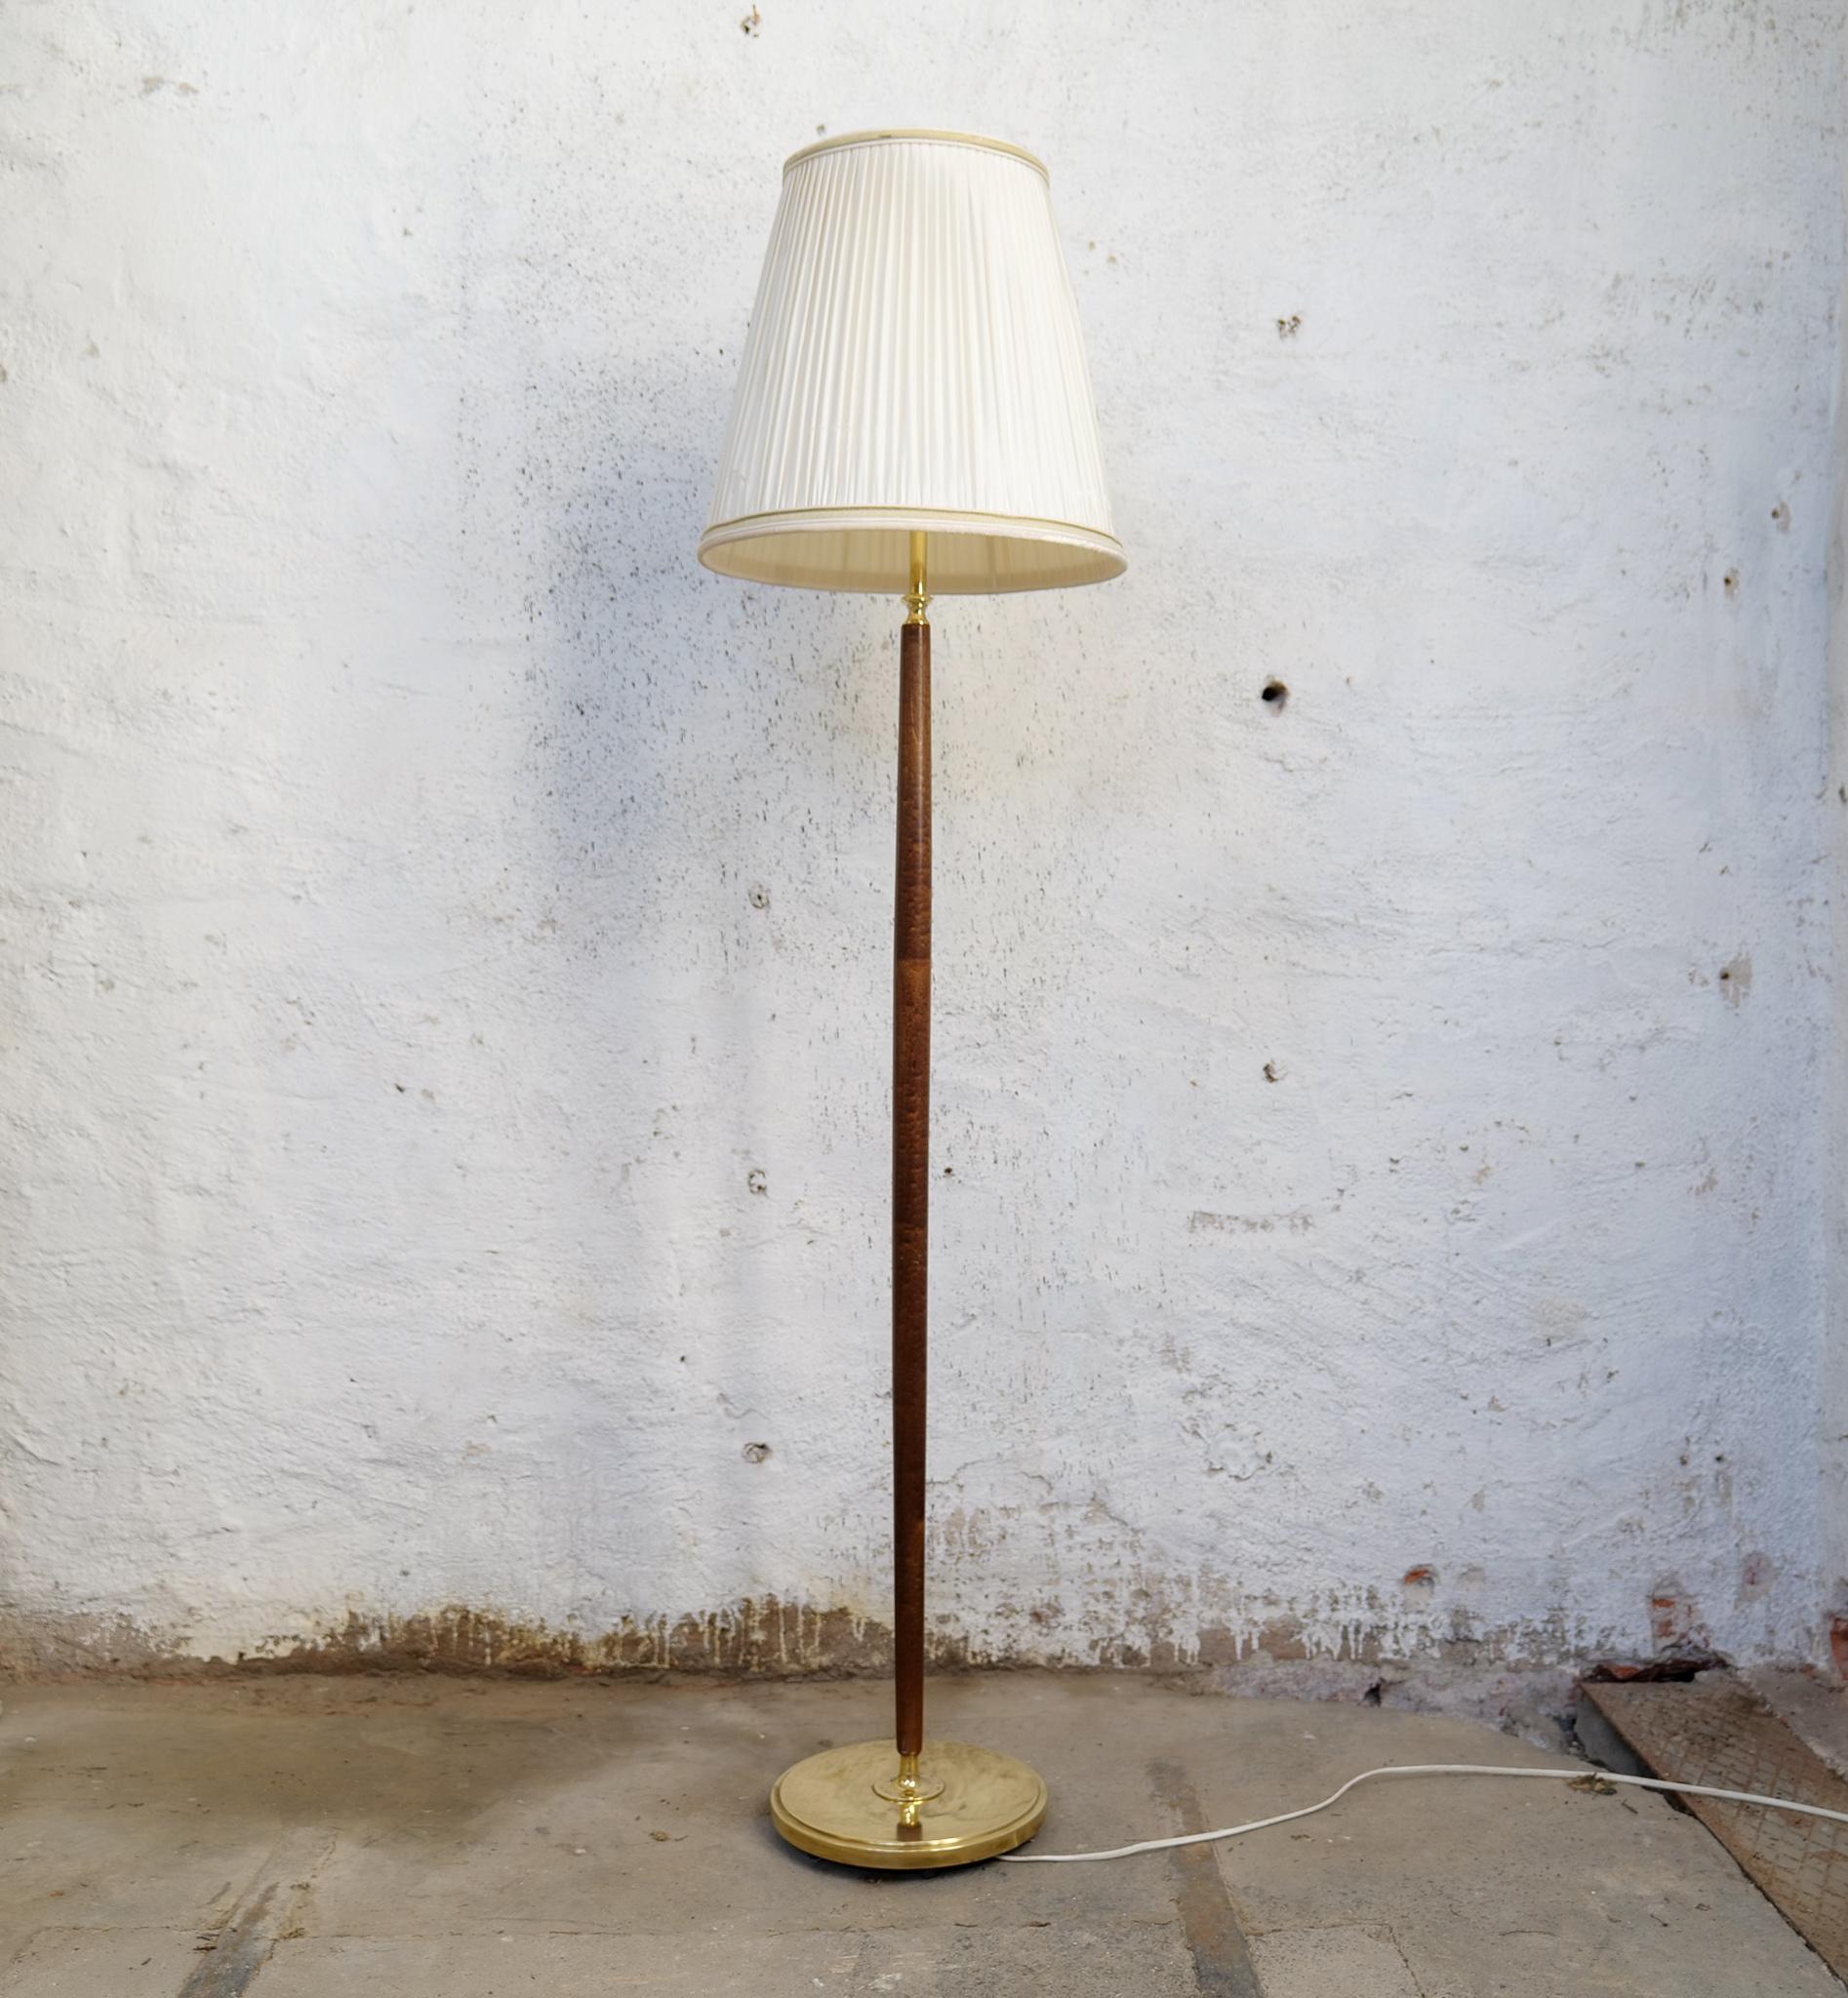 Mid-Century Modern Mid-Century Floor Lamp Brass and Polished Wood Böhlmarks, Sweden, 1940s For Sale